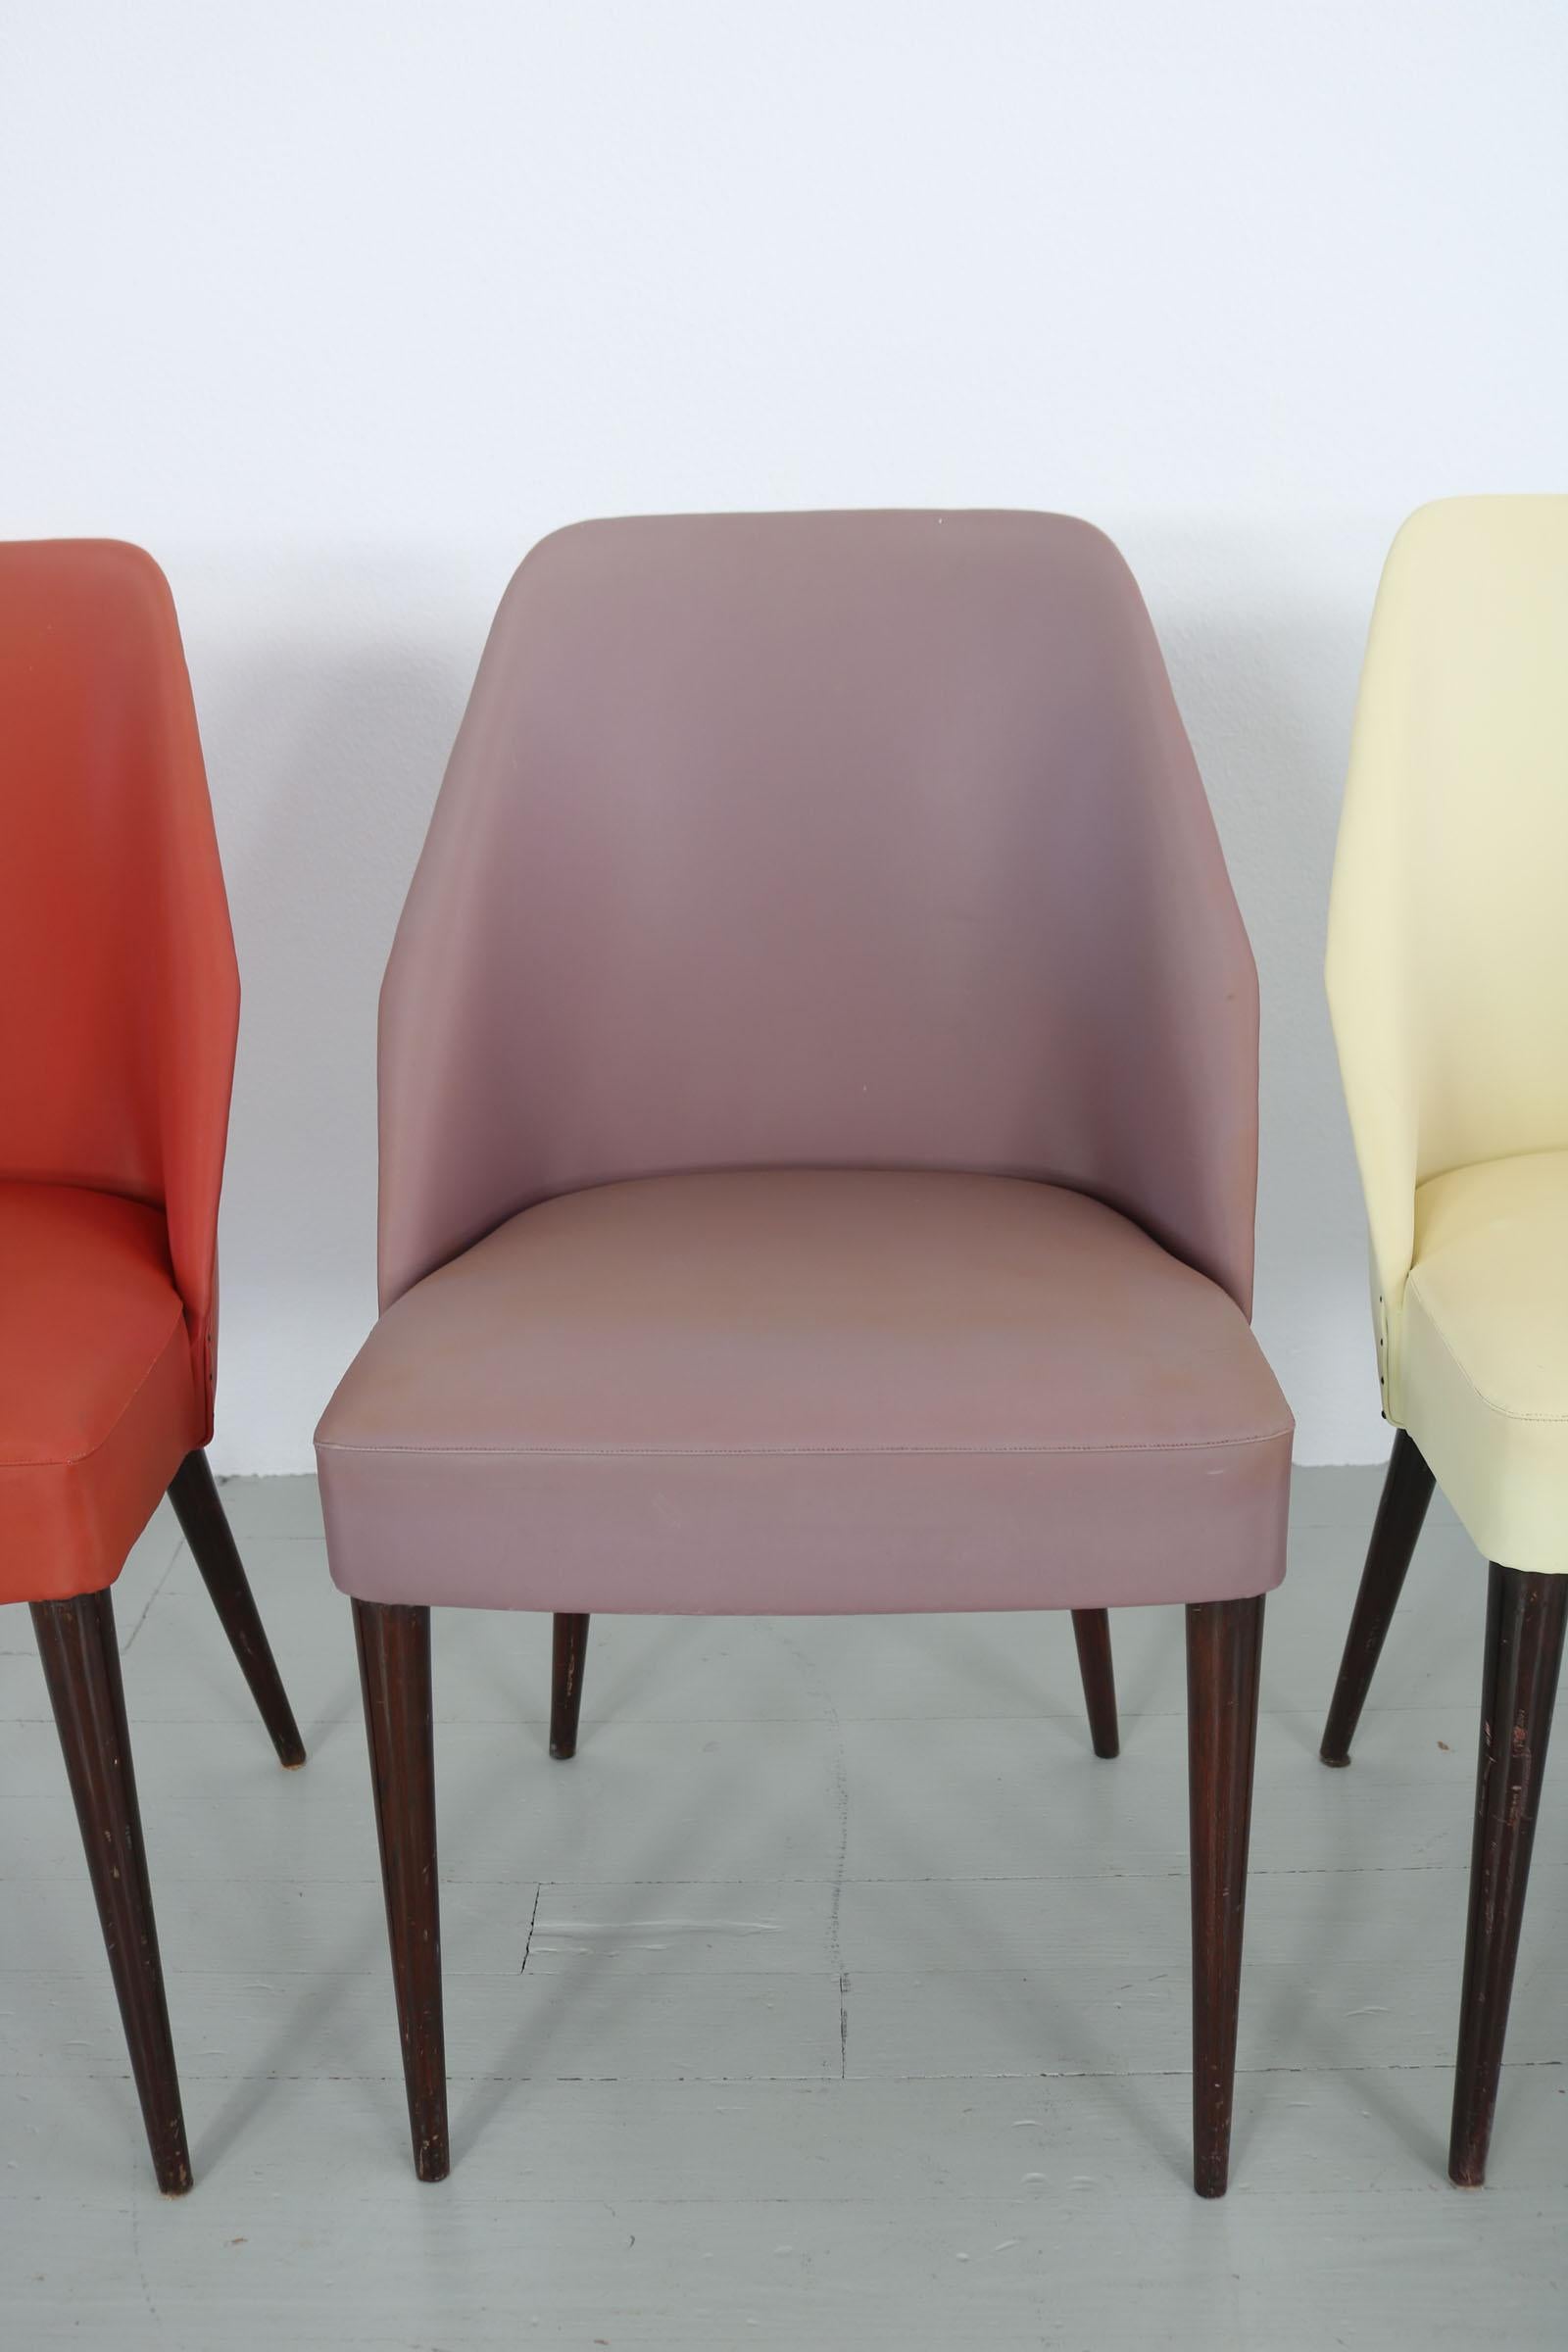 Mid-20th Century Set of 4 Chairs, Designed and Manufactured by Figli Di Amedeo Cassina in Italy For Sale